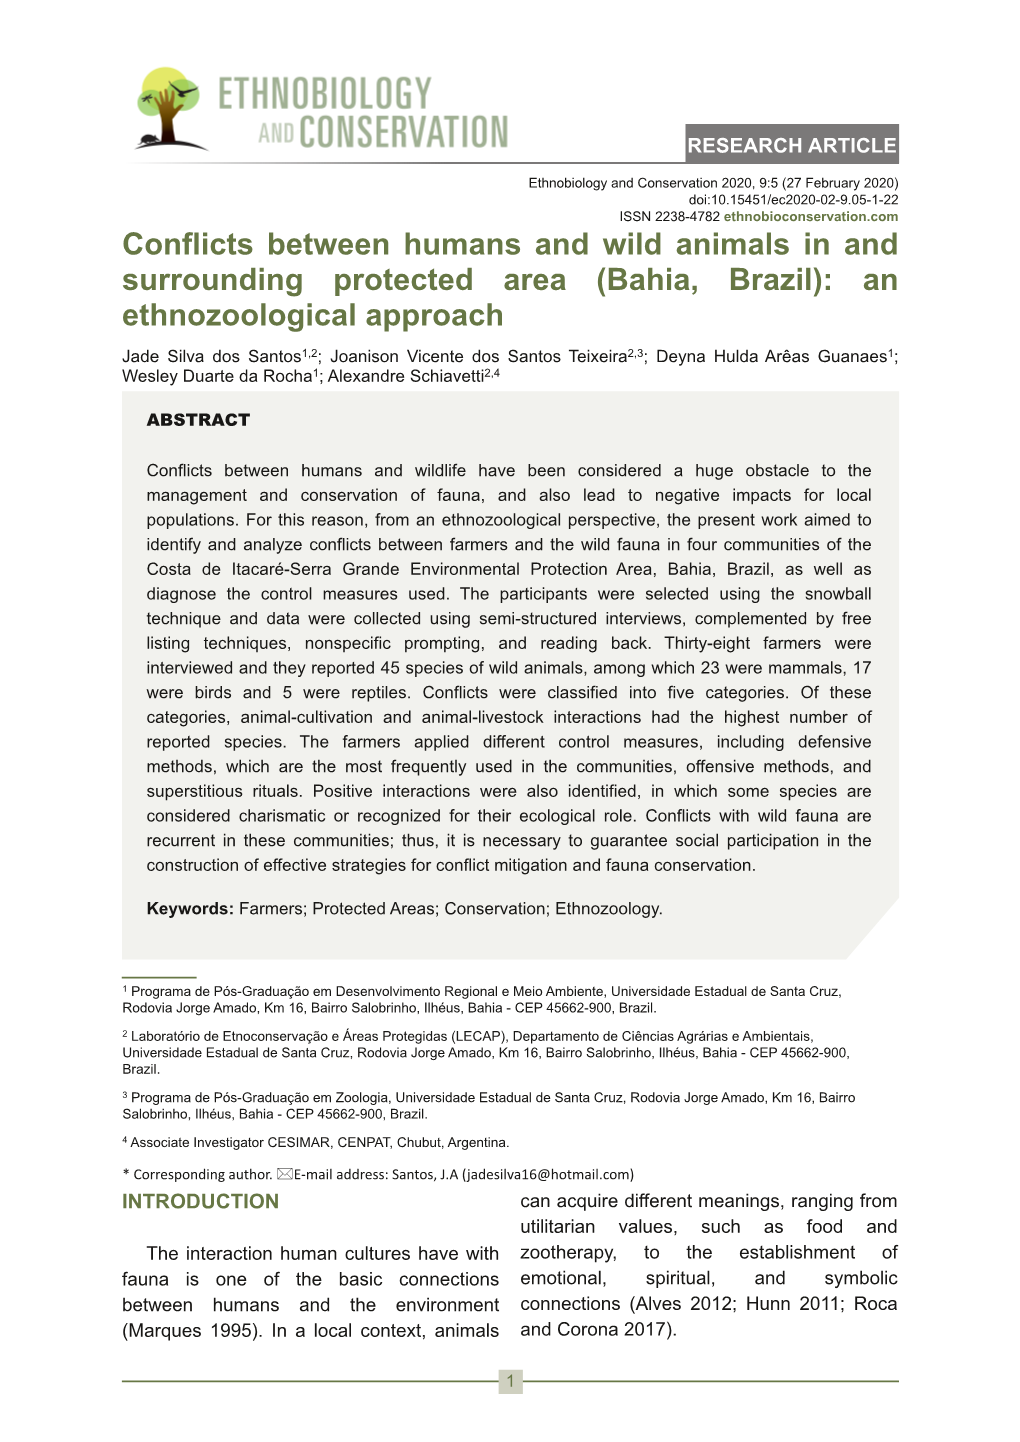 Conflicts Between Humans and Wild Animals in and Surrounding